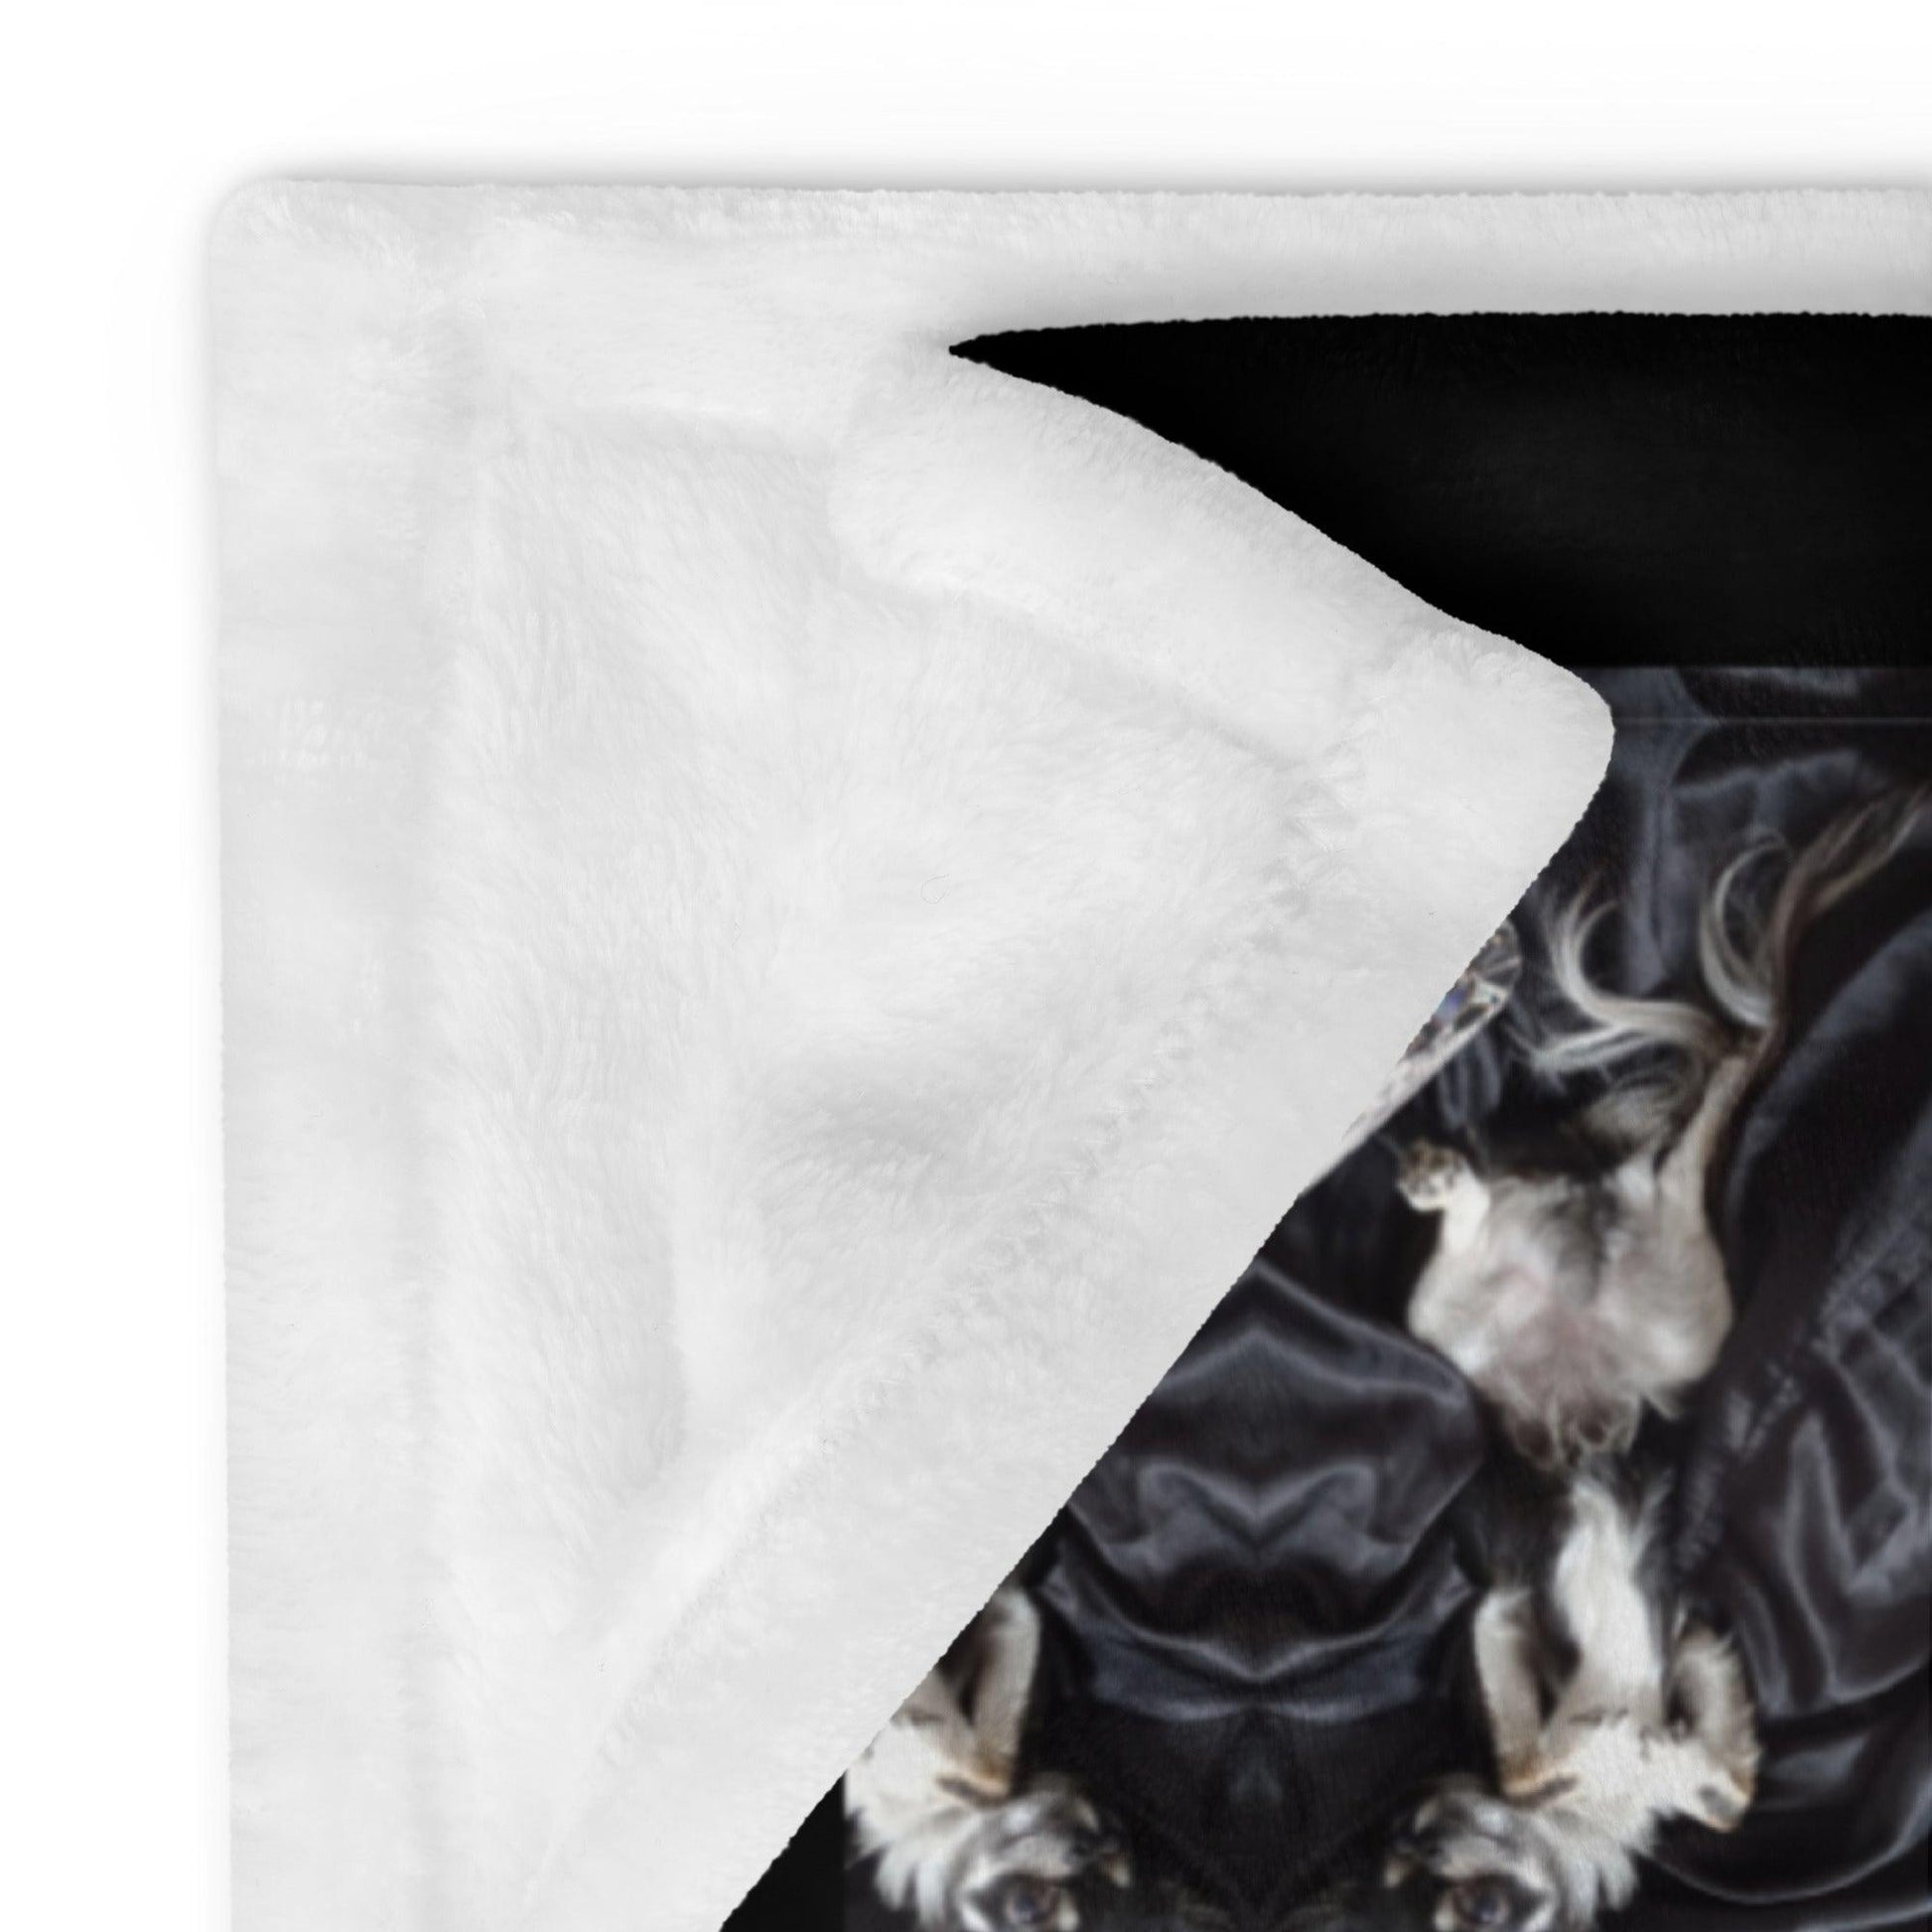 A gorgeous longhaired chihuahua boy posing seductively on a black silk sheet. On repeat. And a cheeky scattering of diamonds! So luxurious. Divine! The makings of a stylish Art Deco effect, with an on-trend bling twist. This silky soft black and white Chihuahuas and Diamonds throw blanket will be a unique and classy addition to your home, and a brilliant gift of cuteness overload for anyone who loves chihuahuas. Bling bling you win! Design by Renate Kriegler for Chimigos.